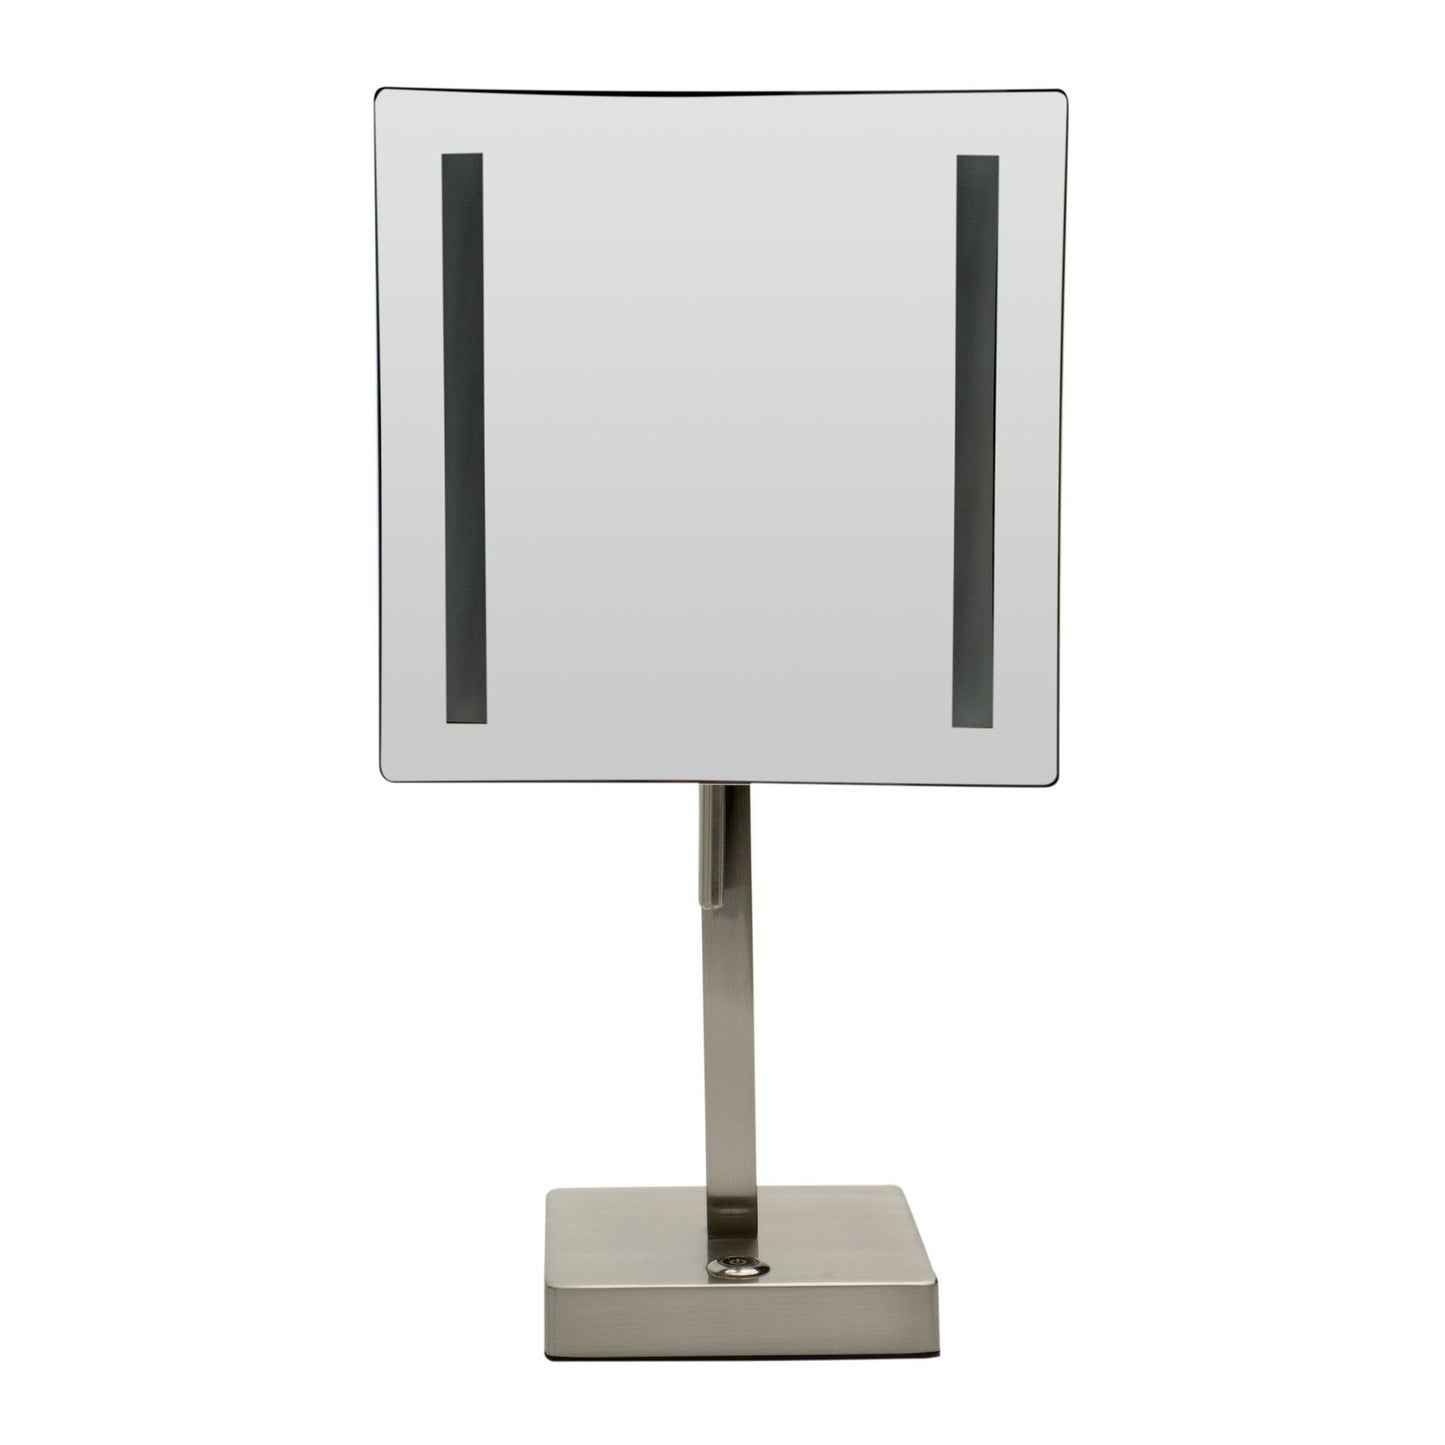 ALFI Brand ABM8FLED-BN 8" Brushed Nickel Freestanding Tabletop Square 5x Magnifying Cosmetic Mirror With Light